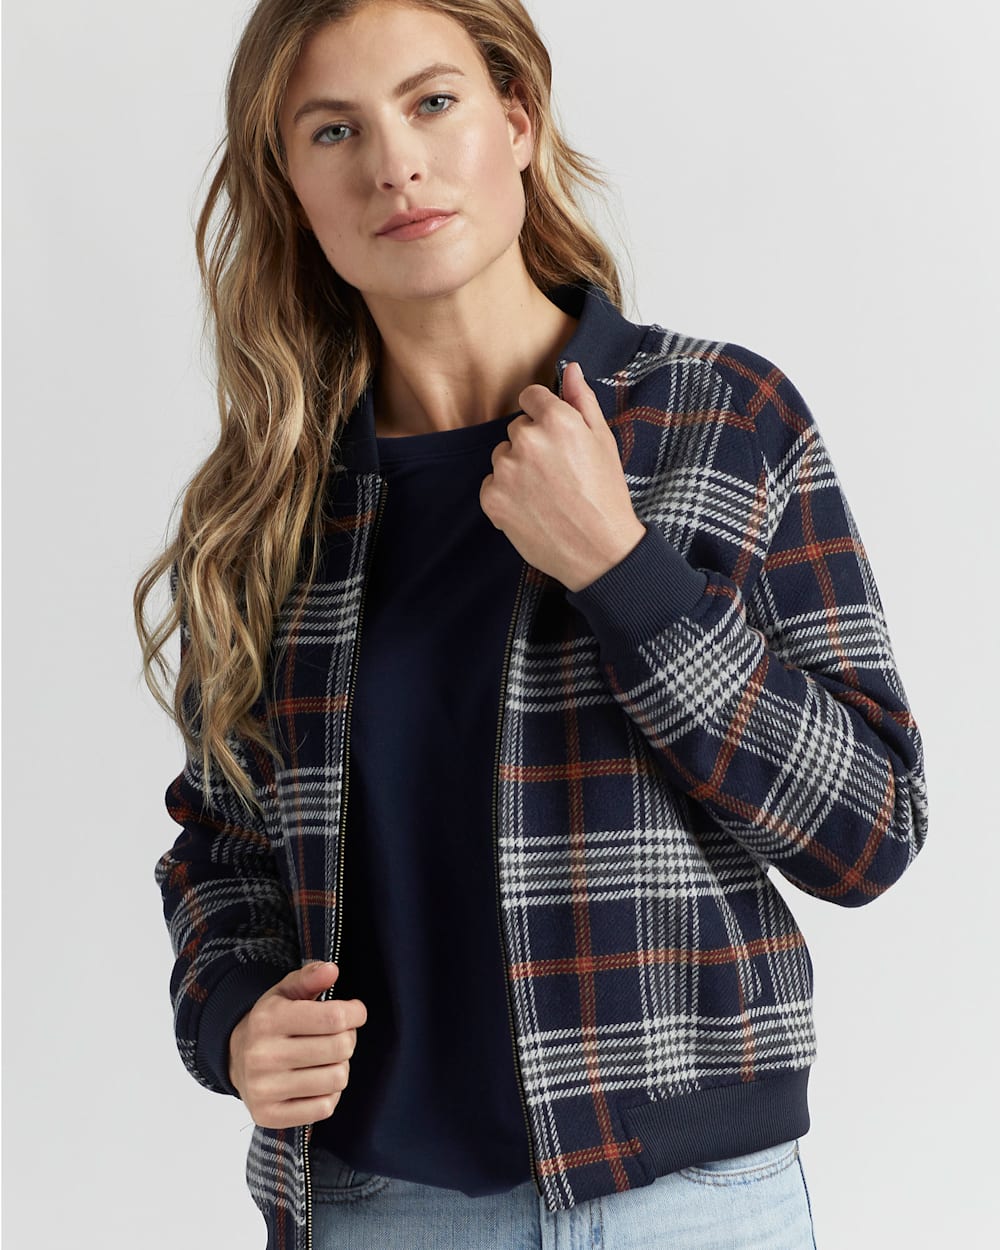 WOMEN'S WOOL PLAID BOMBER JACKET IN NAVY/RED PLAID image number 4